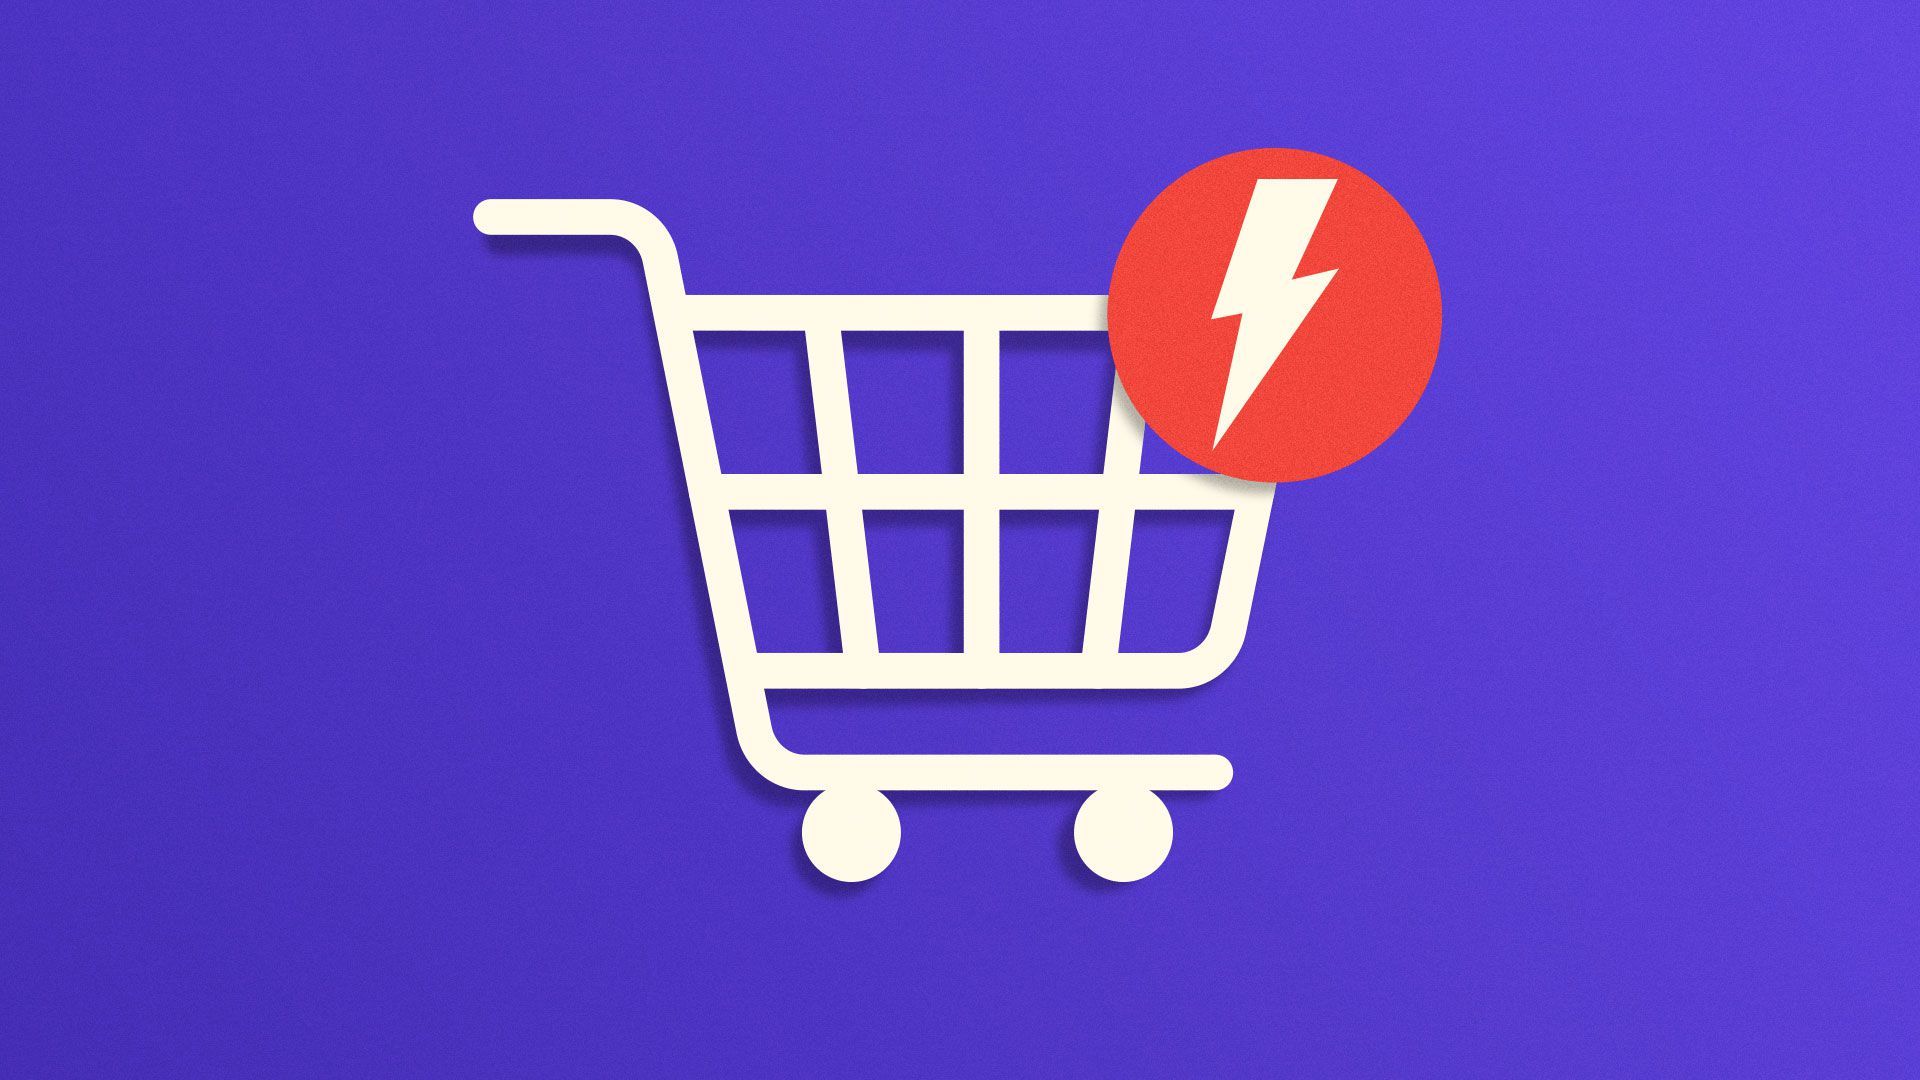 Illustration of a shopping cart icon with a lighting bolt